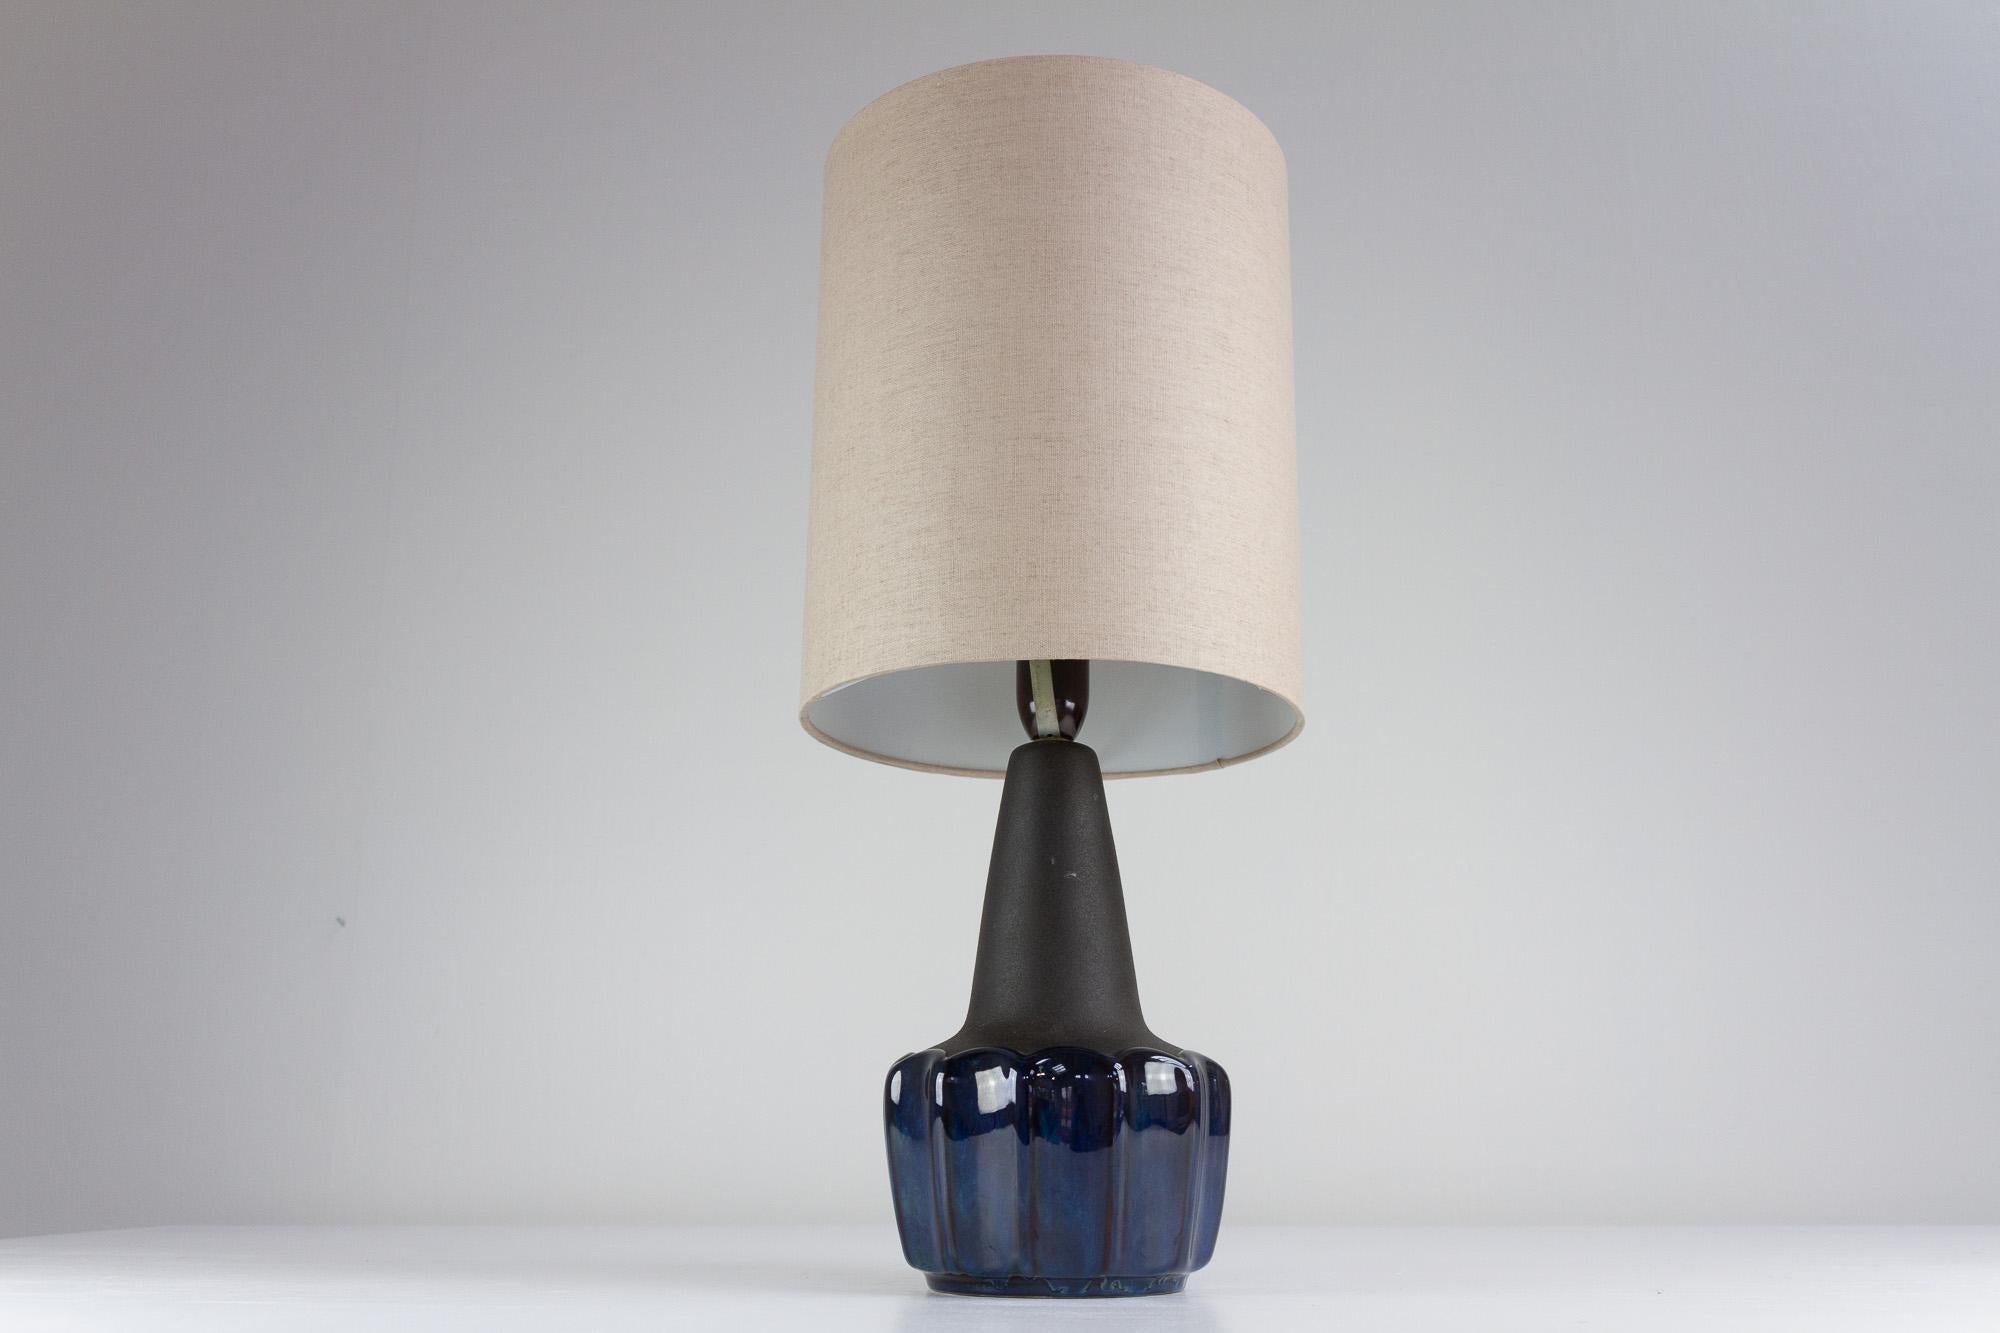 Danish Modern ceramic table lamp by Einar Johansen for Søholm, 1960s.
Mid-Century Modern Danish blue ceramic table lamp designed by Einar Johansen, made by Søholm, Denmark. Soholm is a Danish pottery on the island of Bornholm founded in 1835.